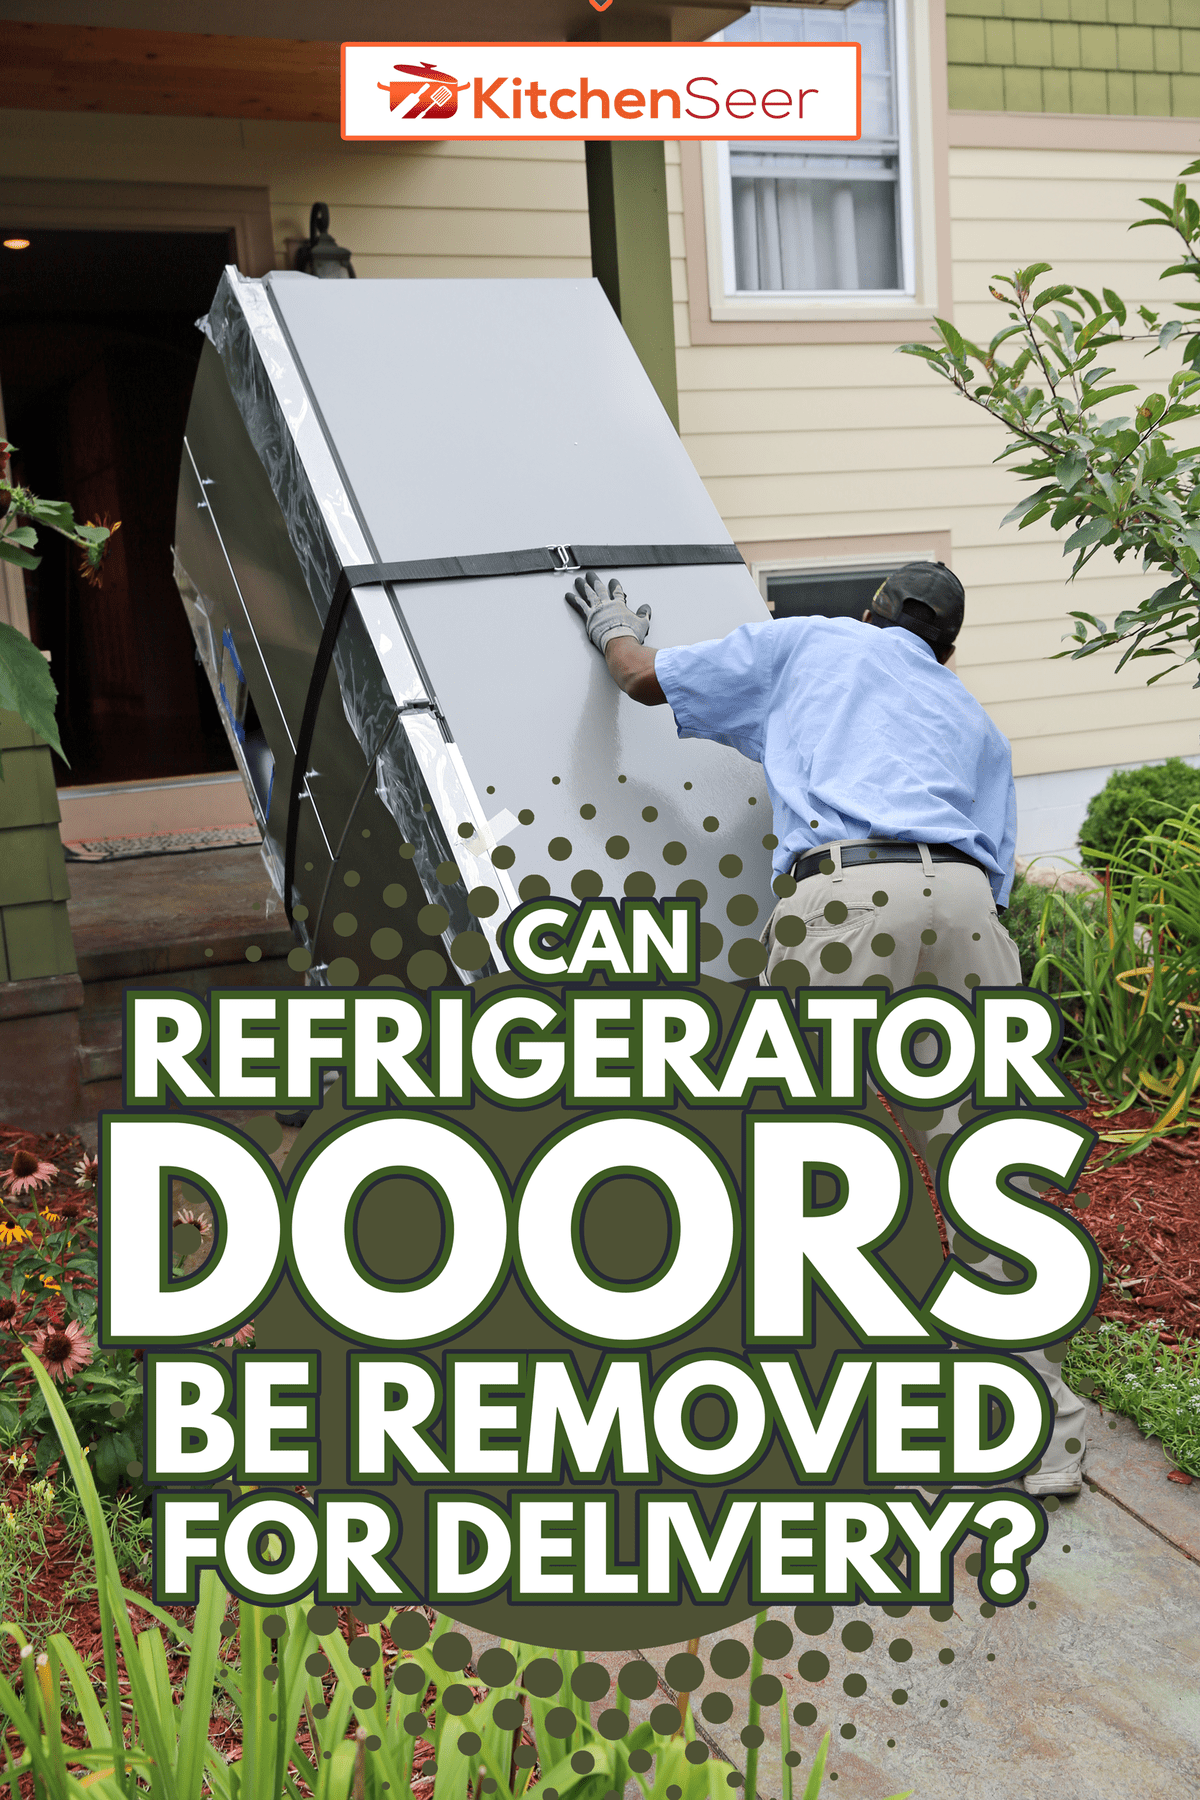 Delivering new refrigerator. - Can Refrigerator Doors Be Removed For Delivery?